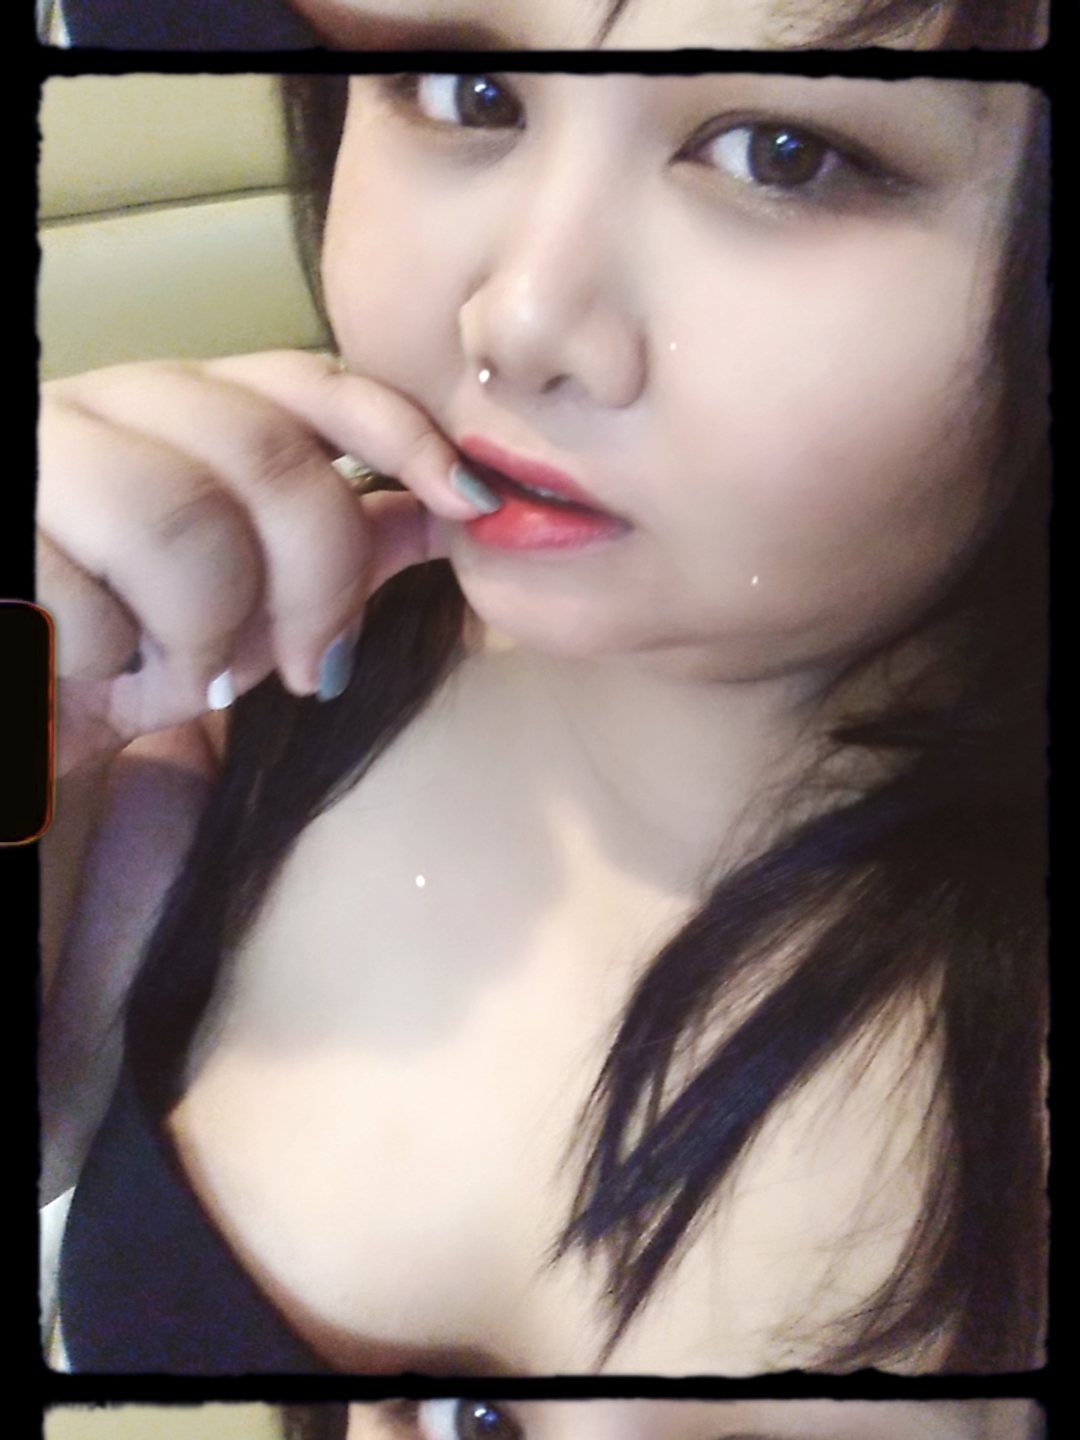 qc manila chubby pinay sexwife Adult Pictures